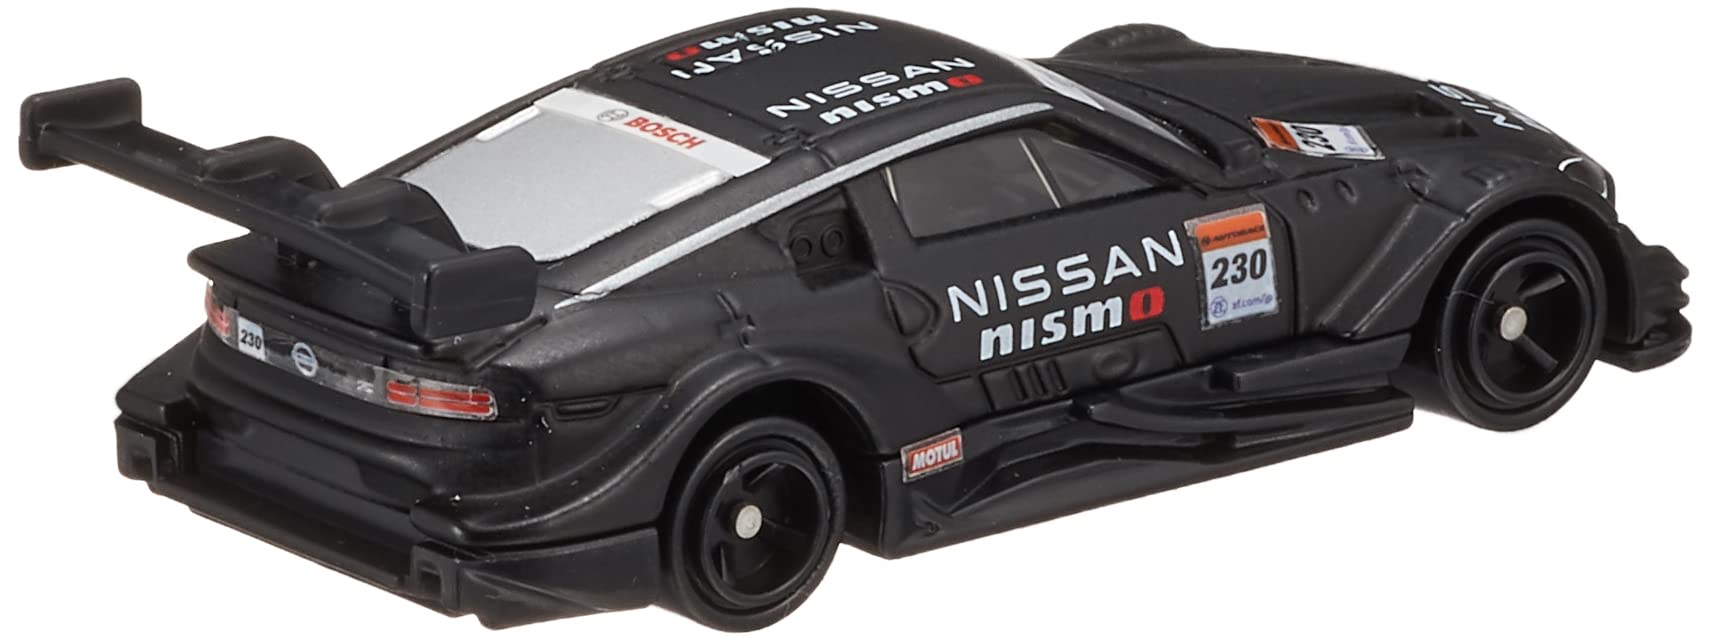 Takara Tomy Tomica No.13 Nissan Fairlady Z Nismo GT500 Mini Car Toy for Ages 3+